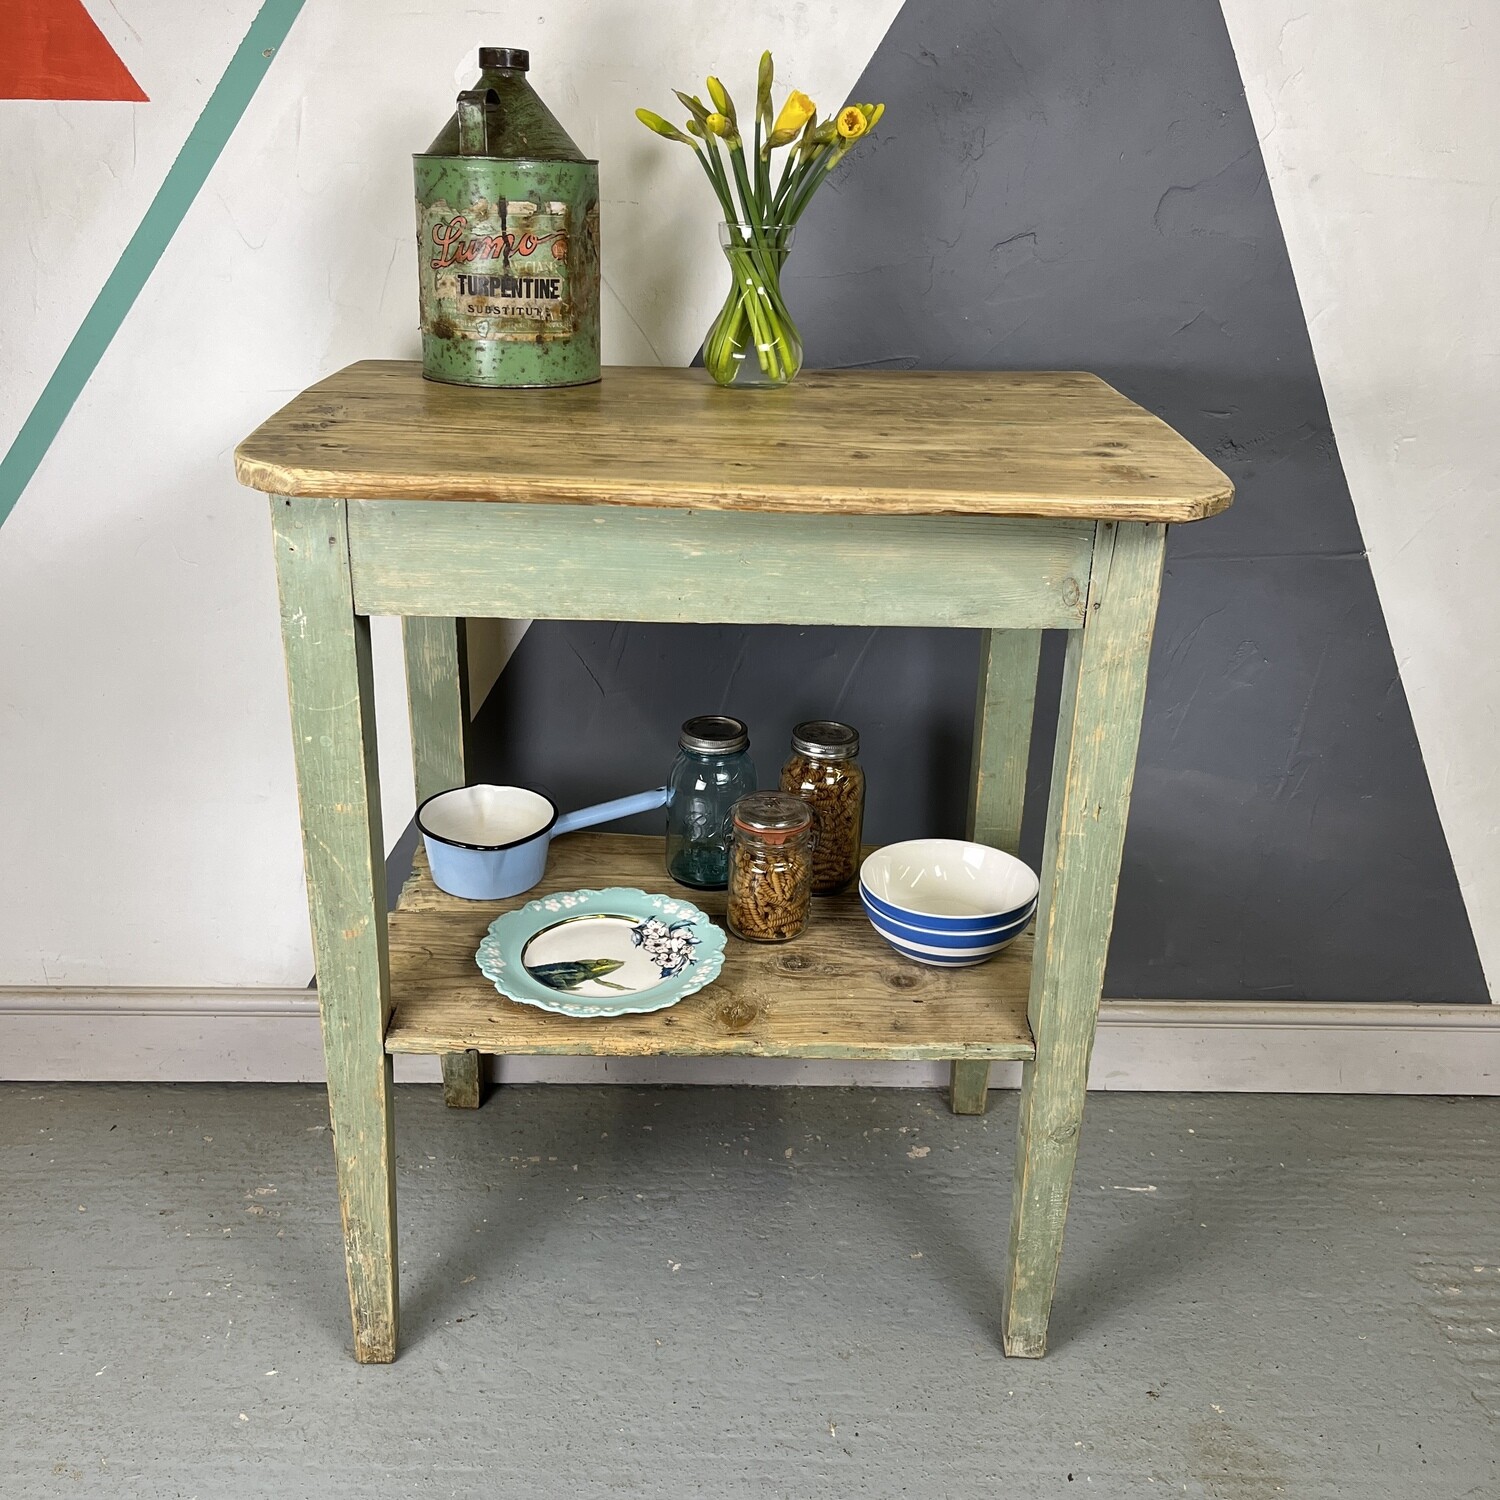 Antique French Potting Table Rustic Painted Green